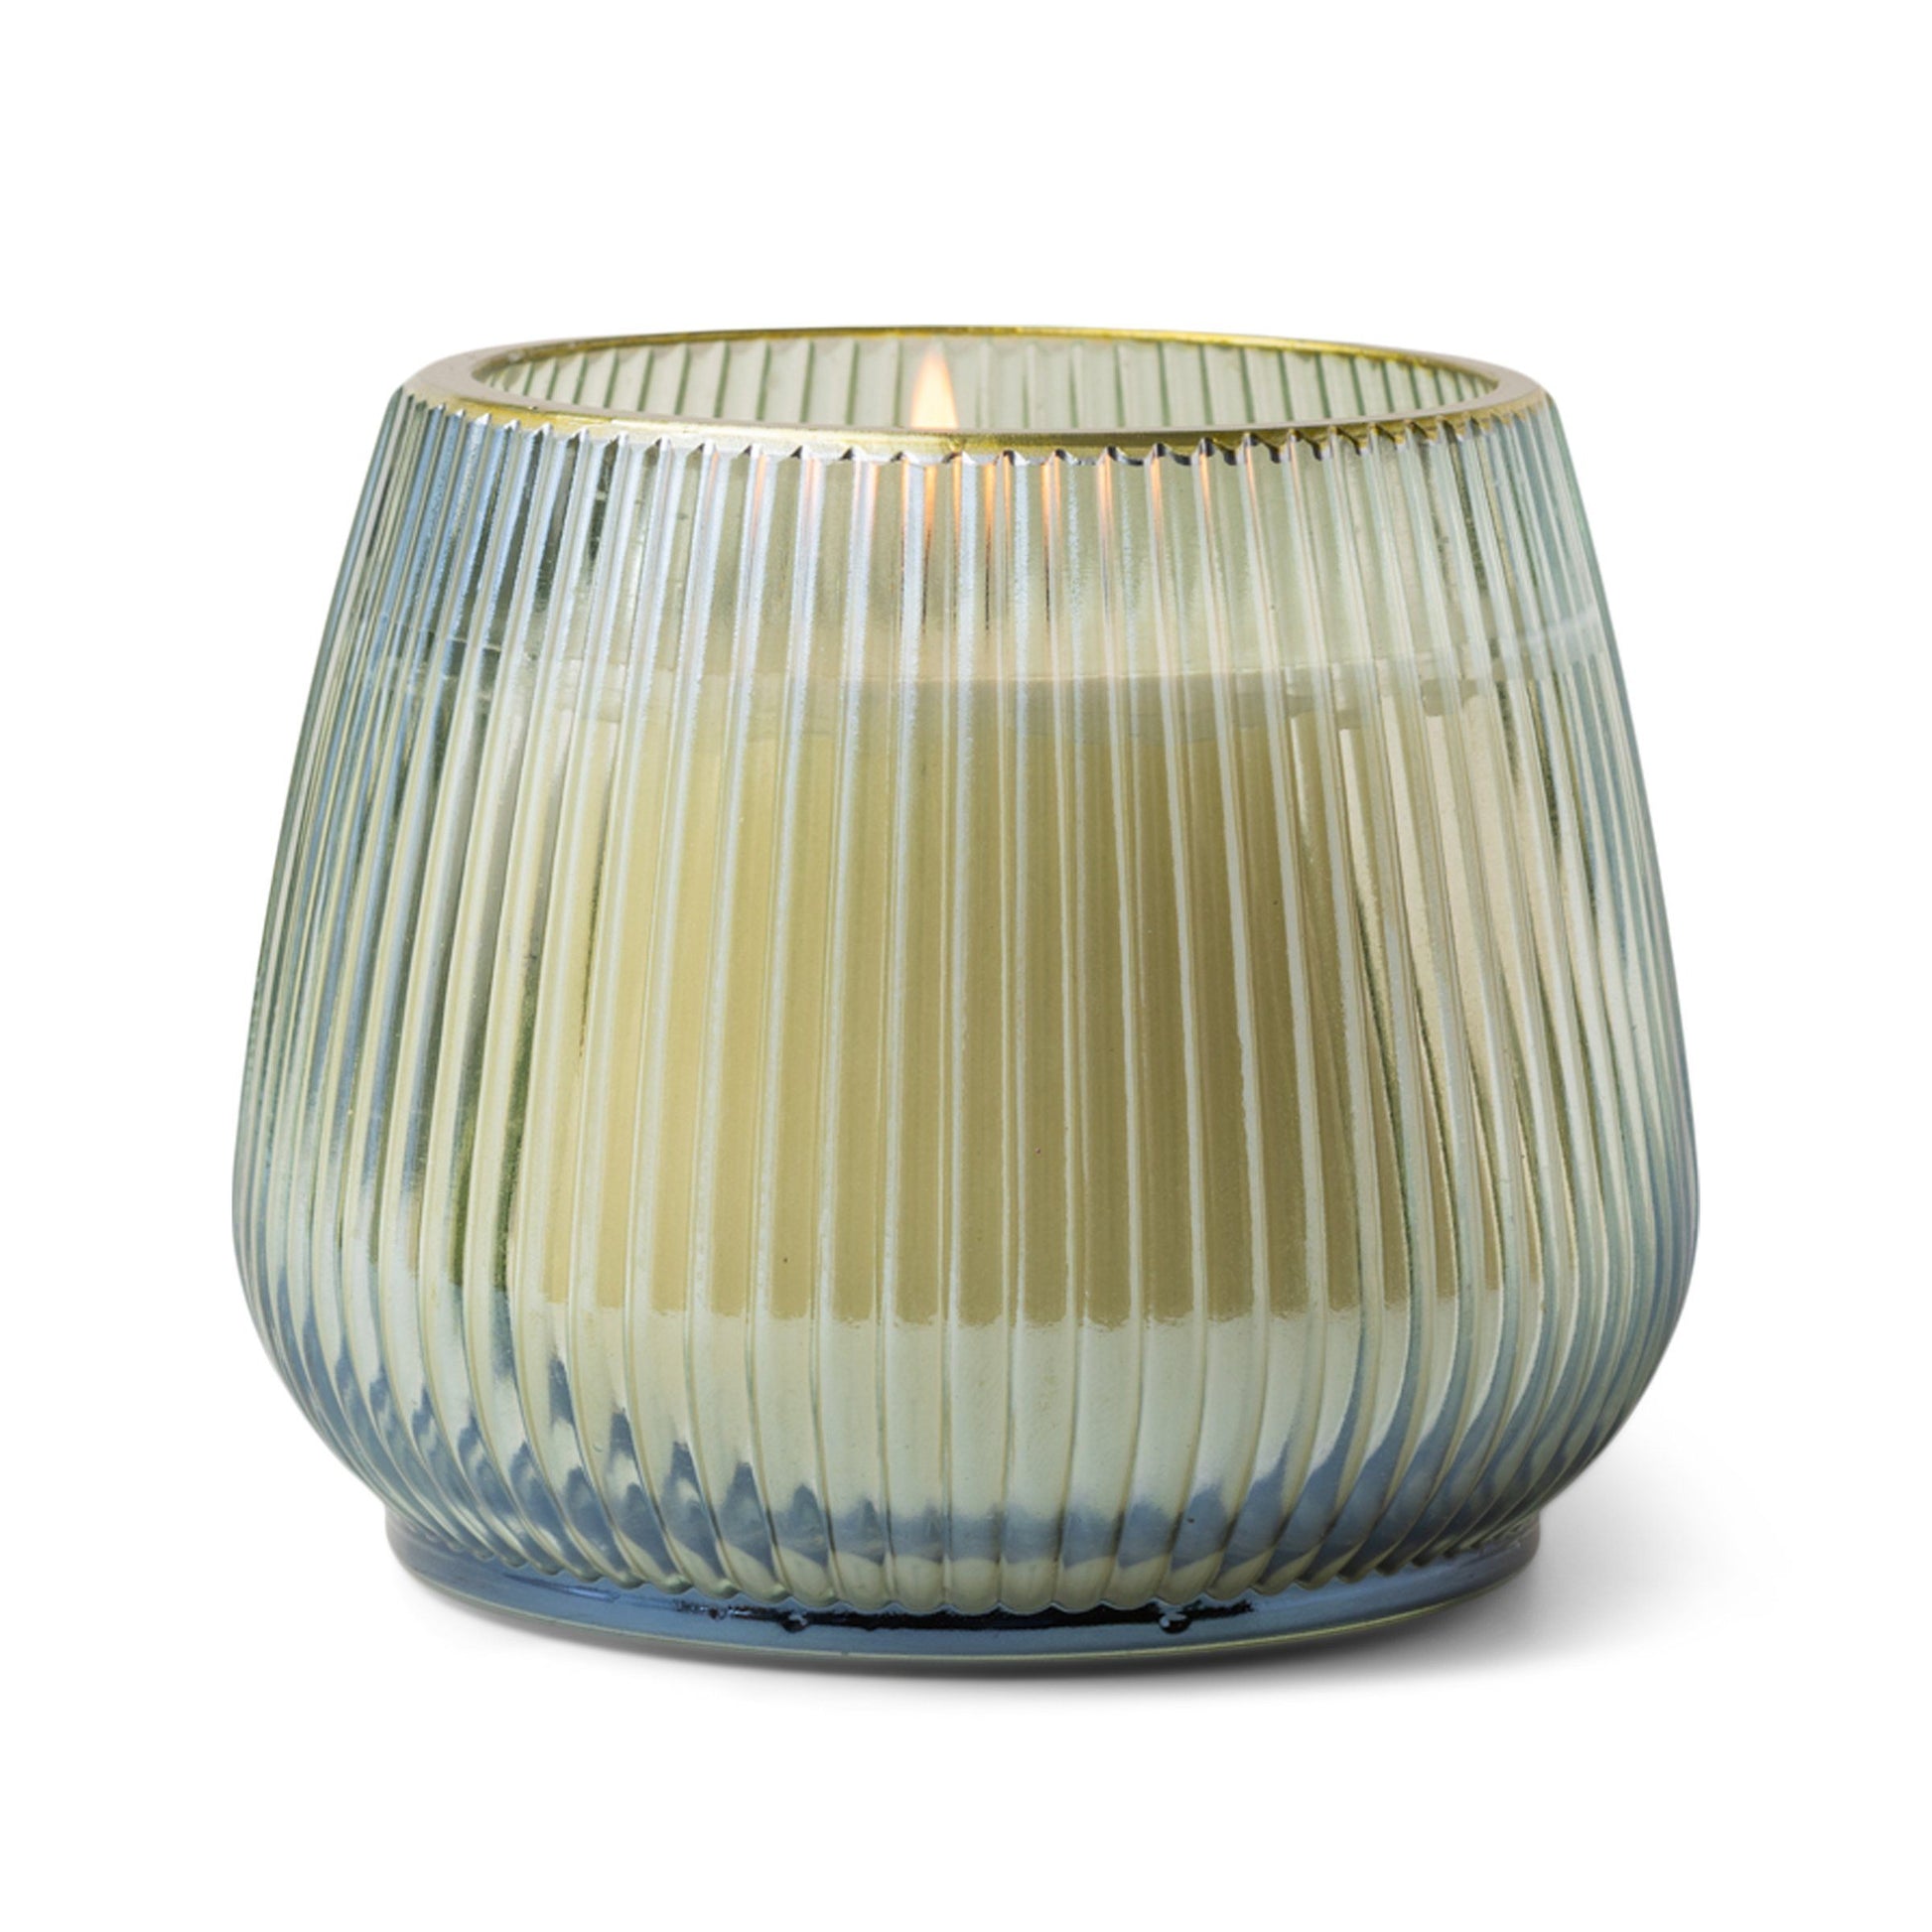  12 oz. ribbed glass vessel with a subtle lustre and gold rim; white wax and one cotton wick